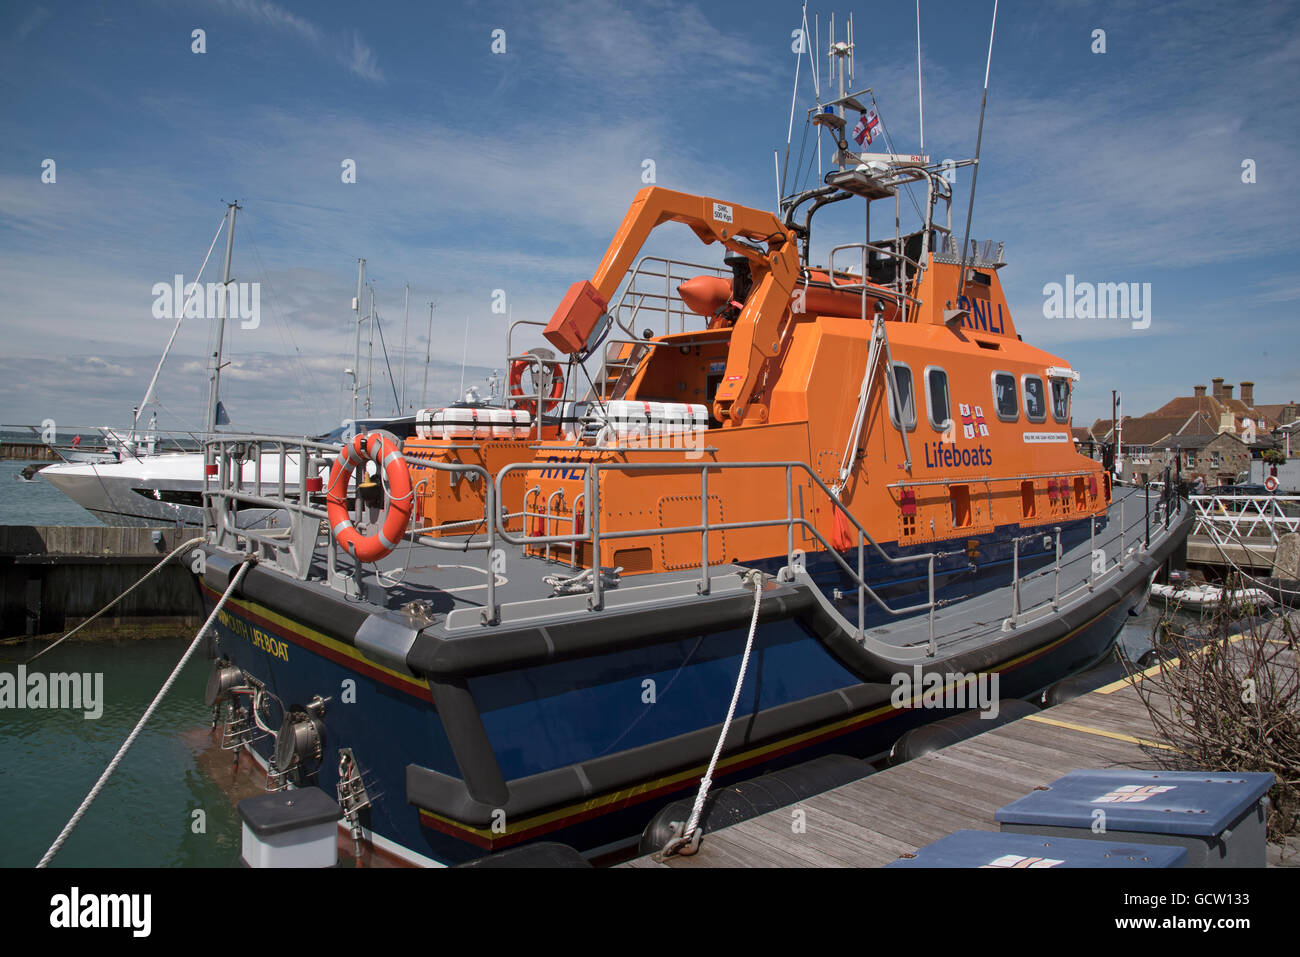 Isle of Wight England UK. The Yarmouth lifeboat on its berth in the harbour Stock Photo